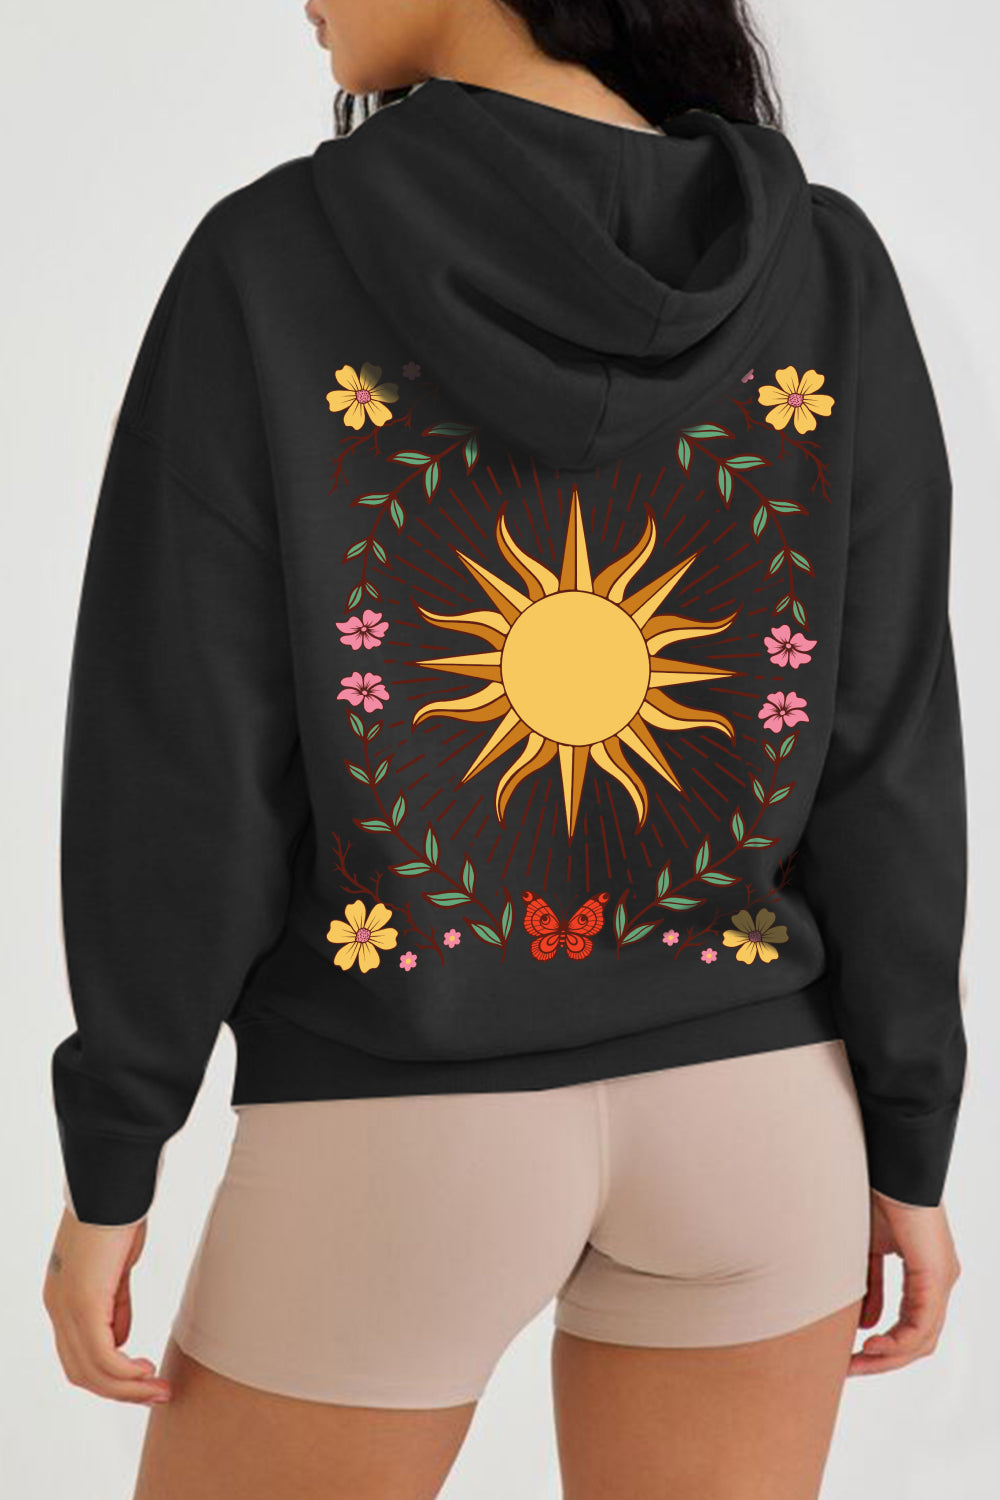 Sun Graphic Hooded Jacket - Women’s Clothing & Accessories - Shirts & Tops - 7 - 2024